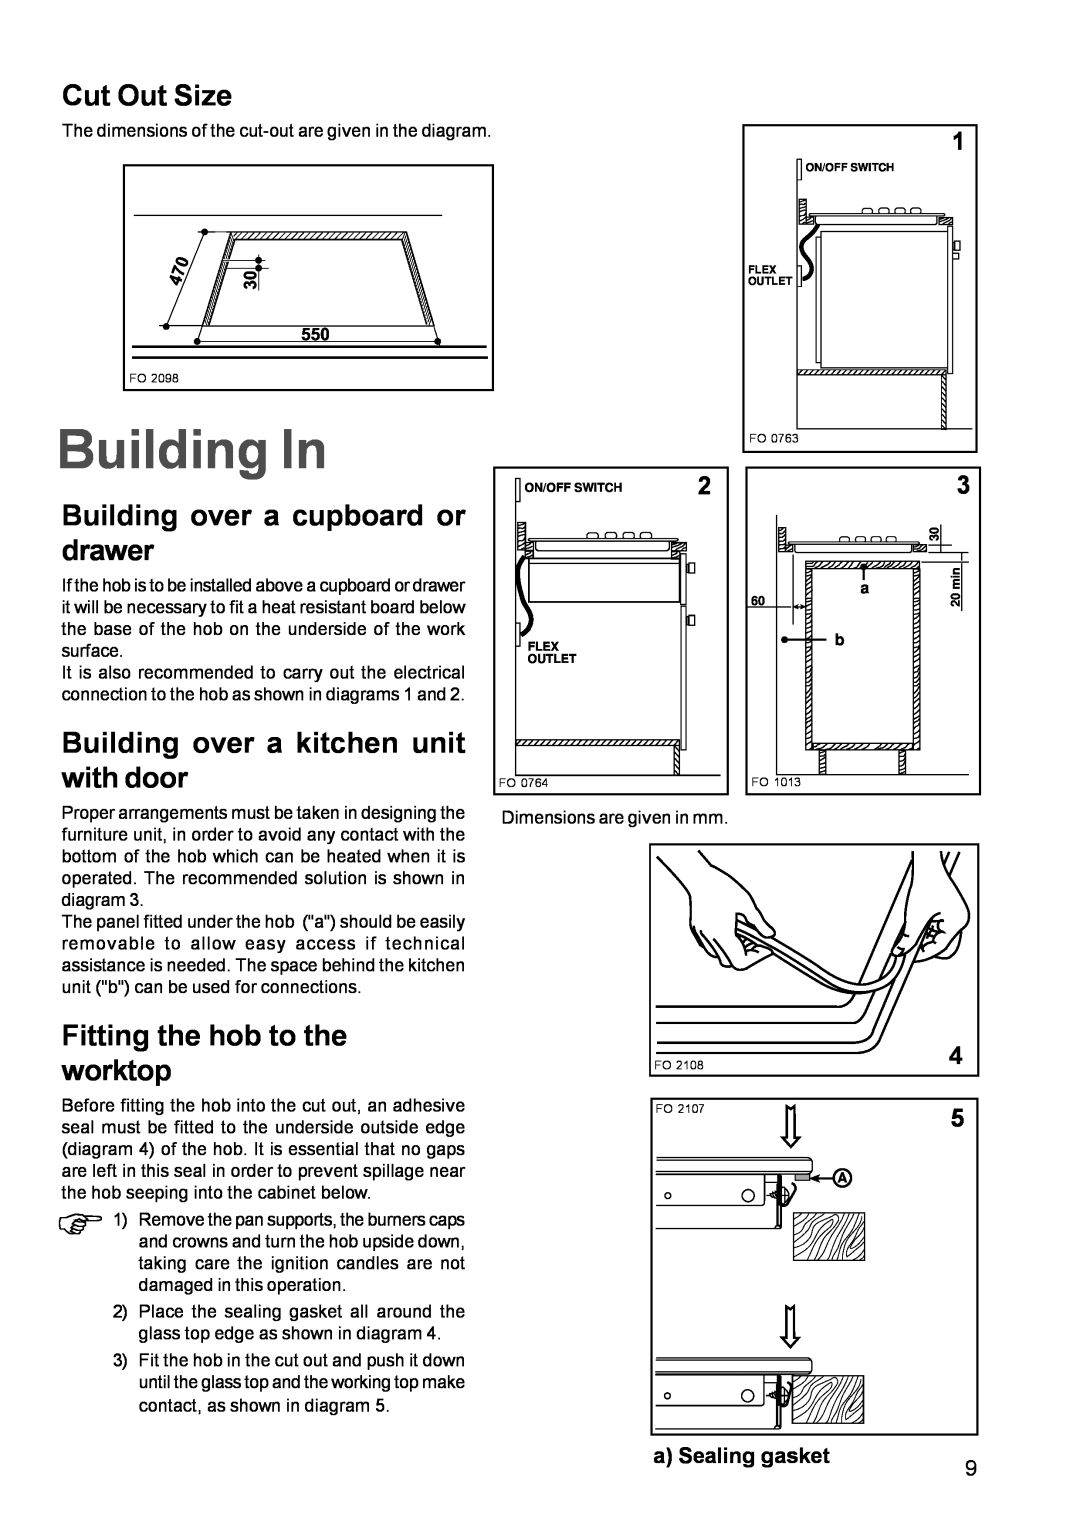 Electrolux EGG 689 Building In, Cut Out Size, Building over a cupboard or drawer, Building over a kitchen unit with door 